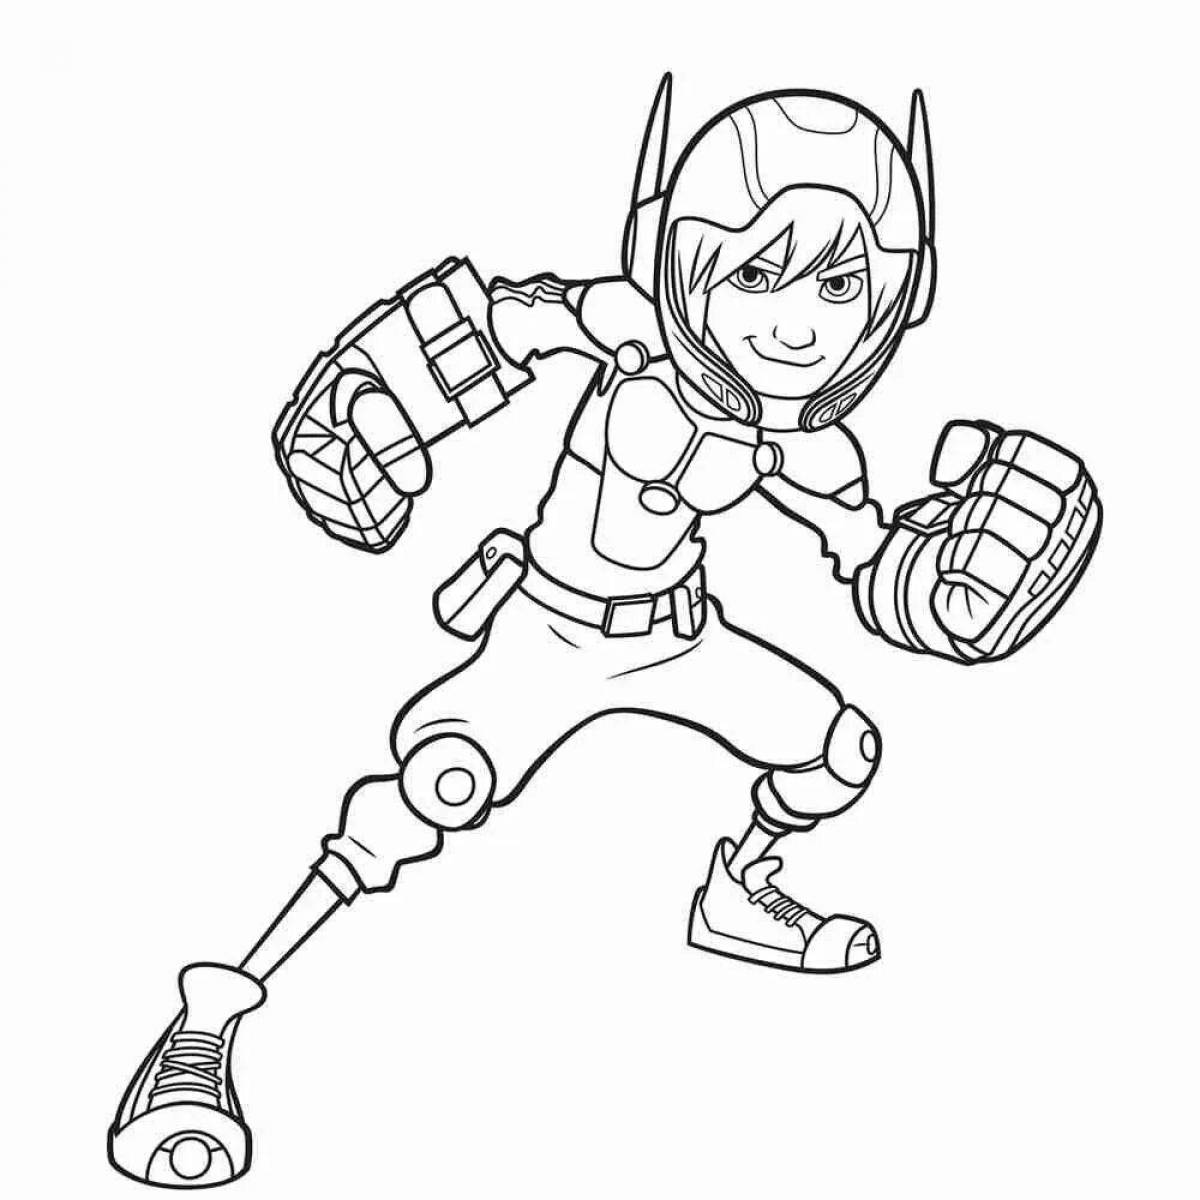 Exquisite coloring page hero